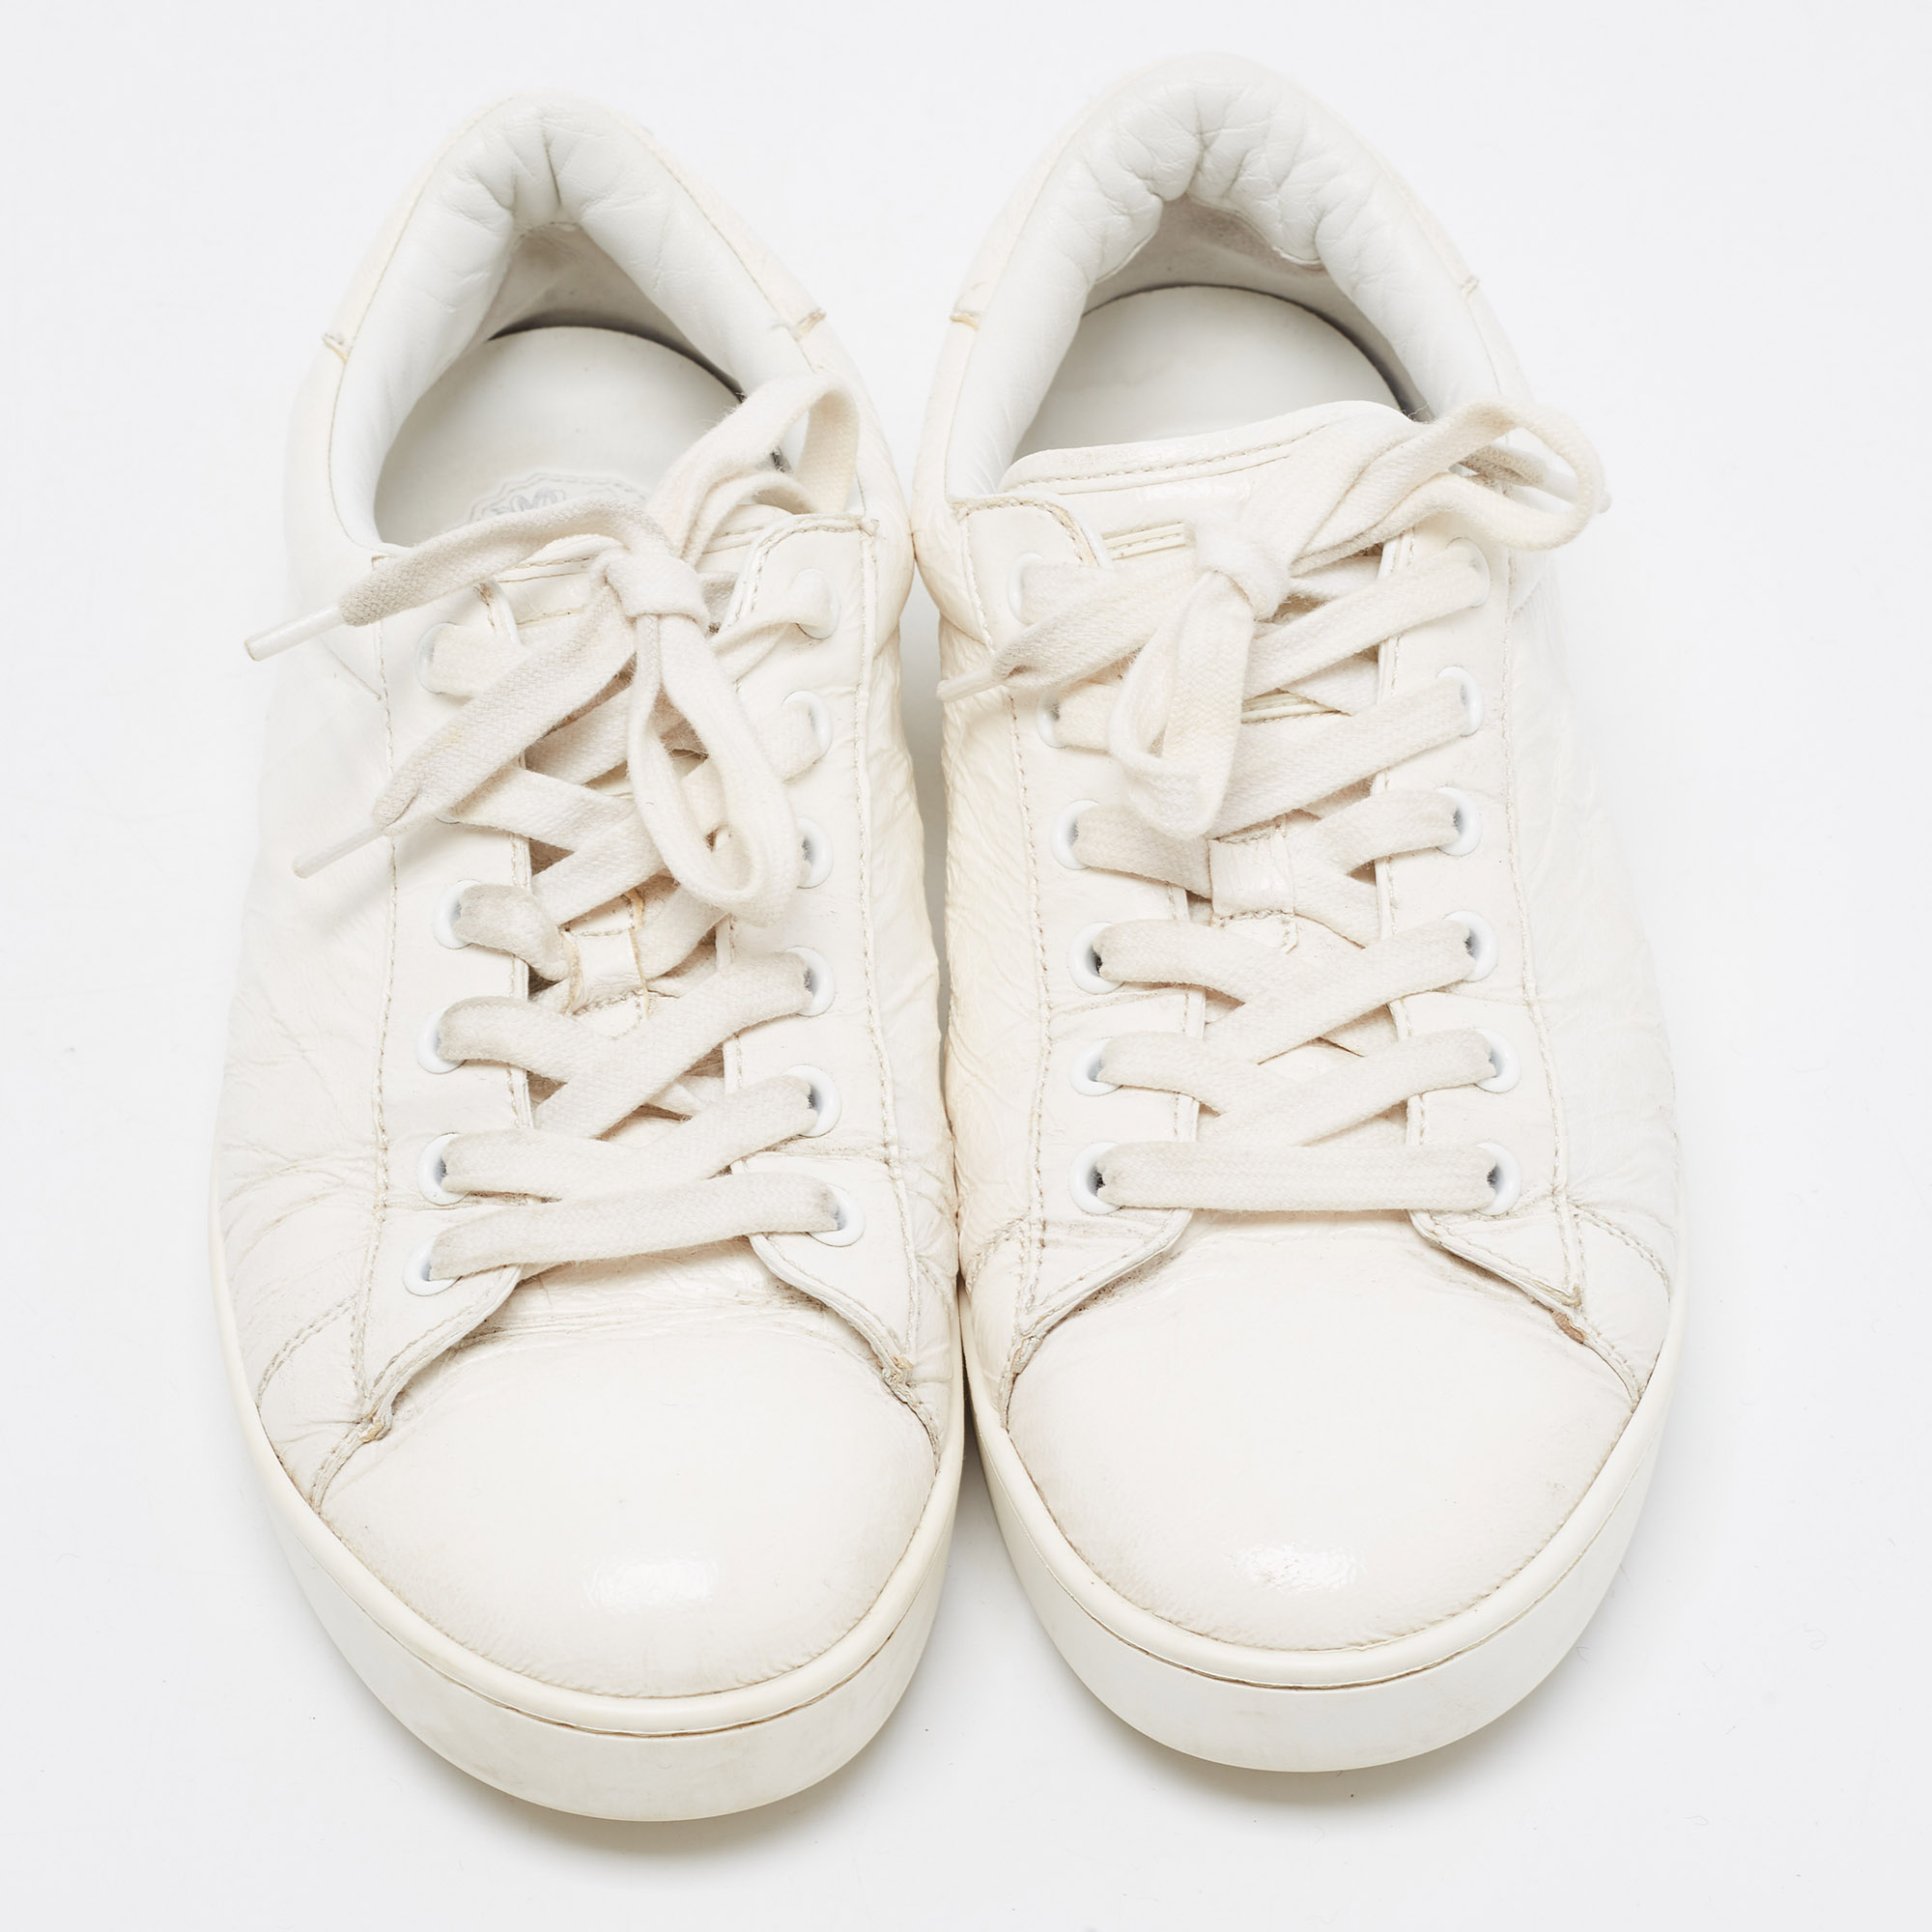 Dior White Crinkled Leather Move Sneakers Size 37.5